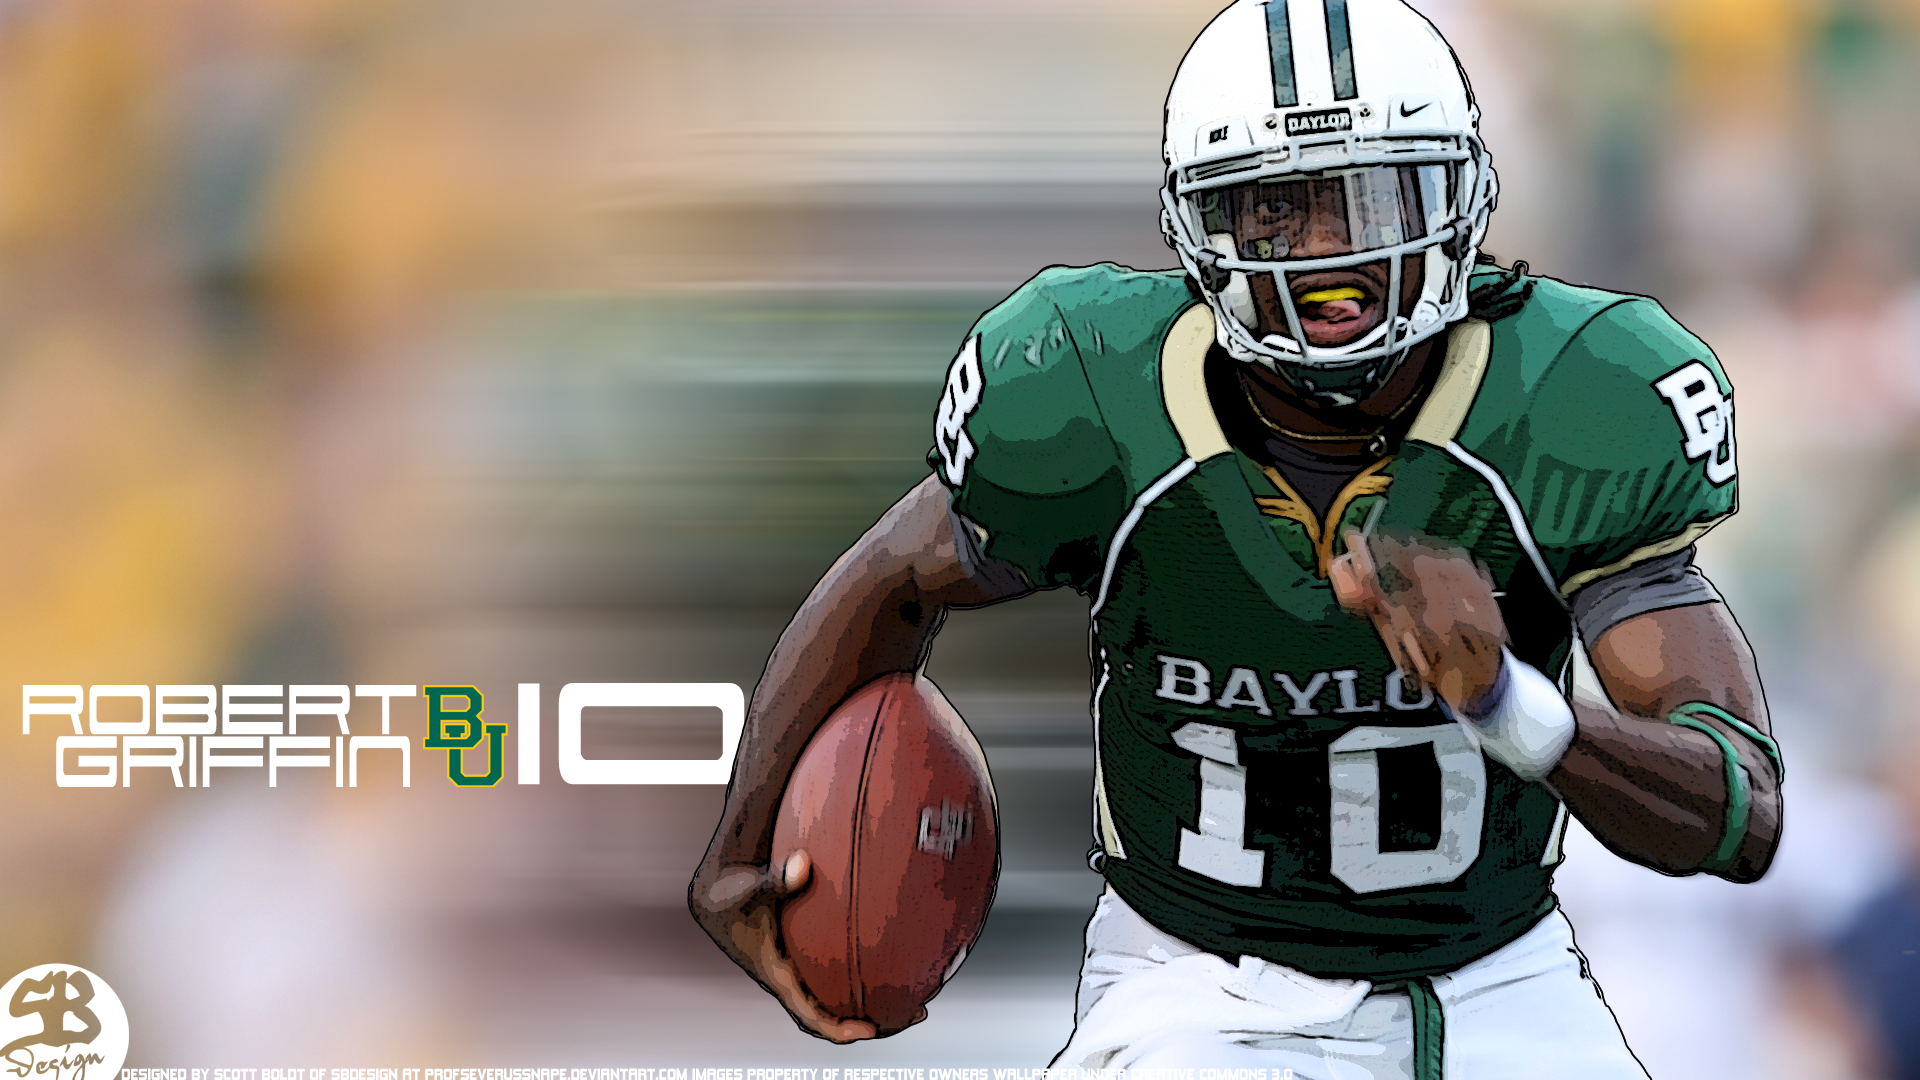 If you like Robert Griffin III, surely you'll love this wallpaper we have choosen for you! Let us know if you like it.